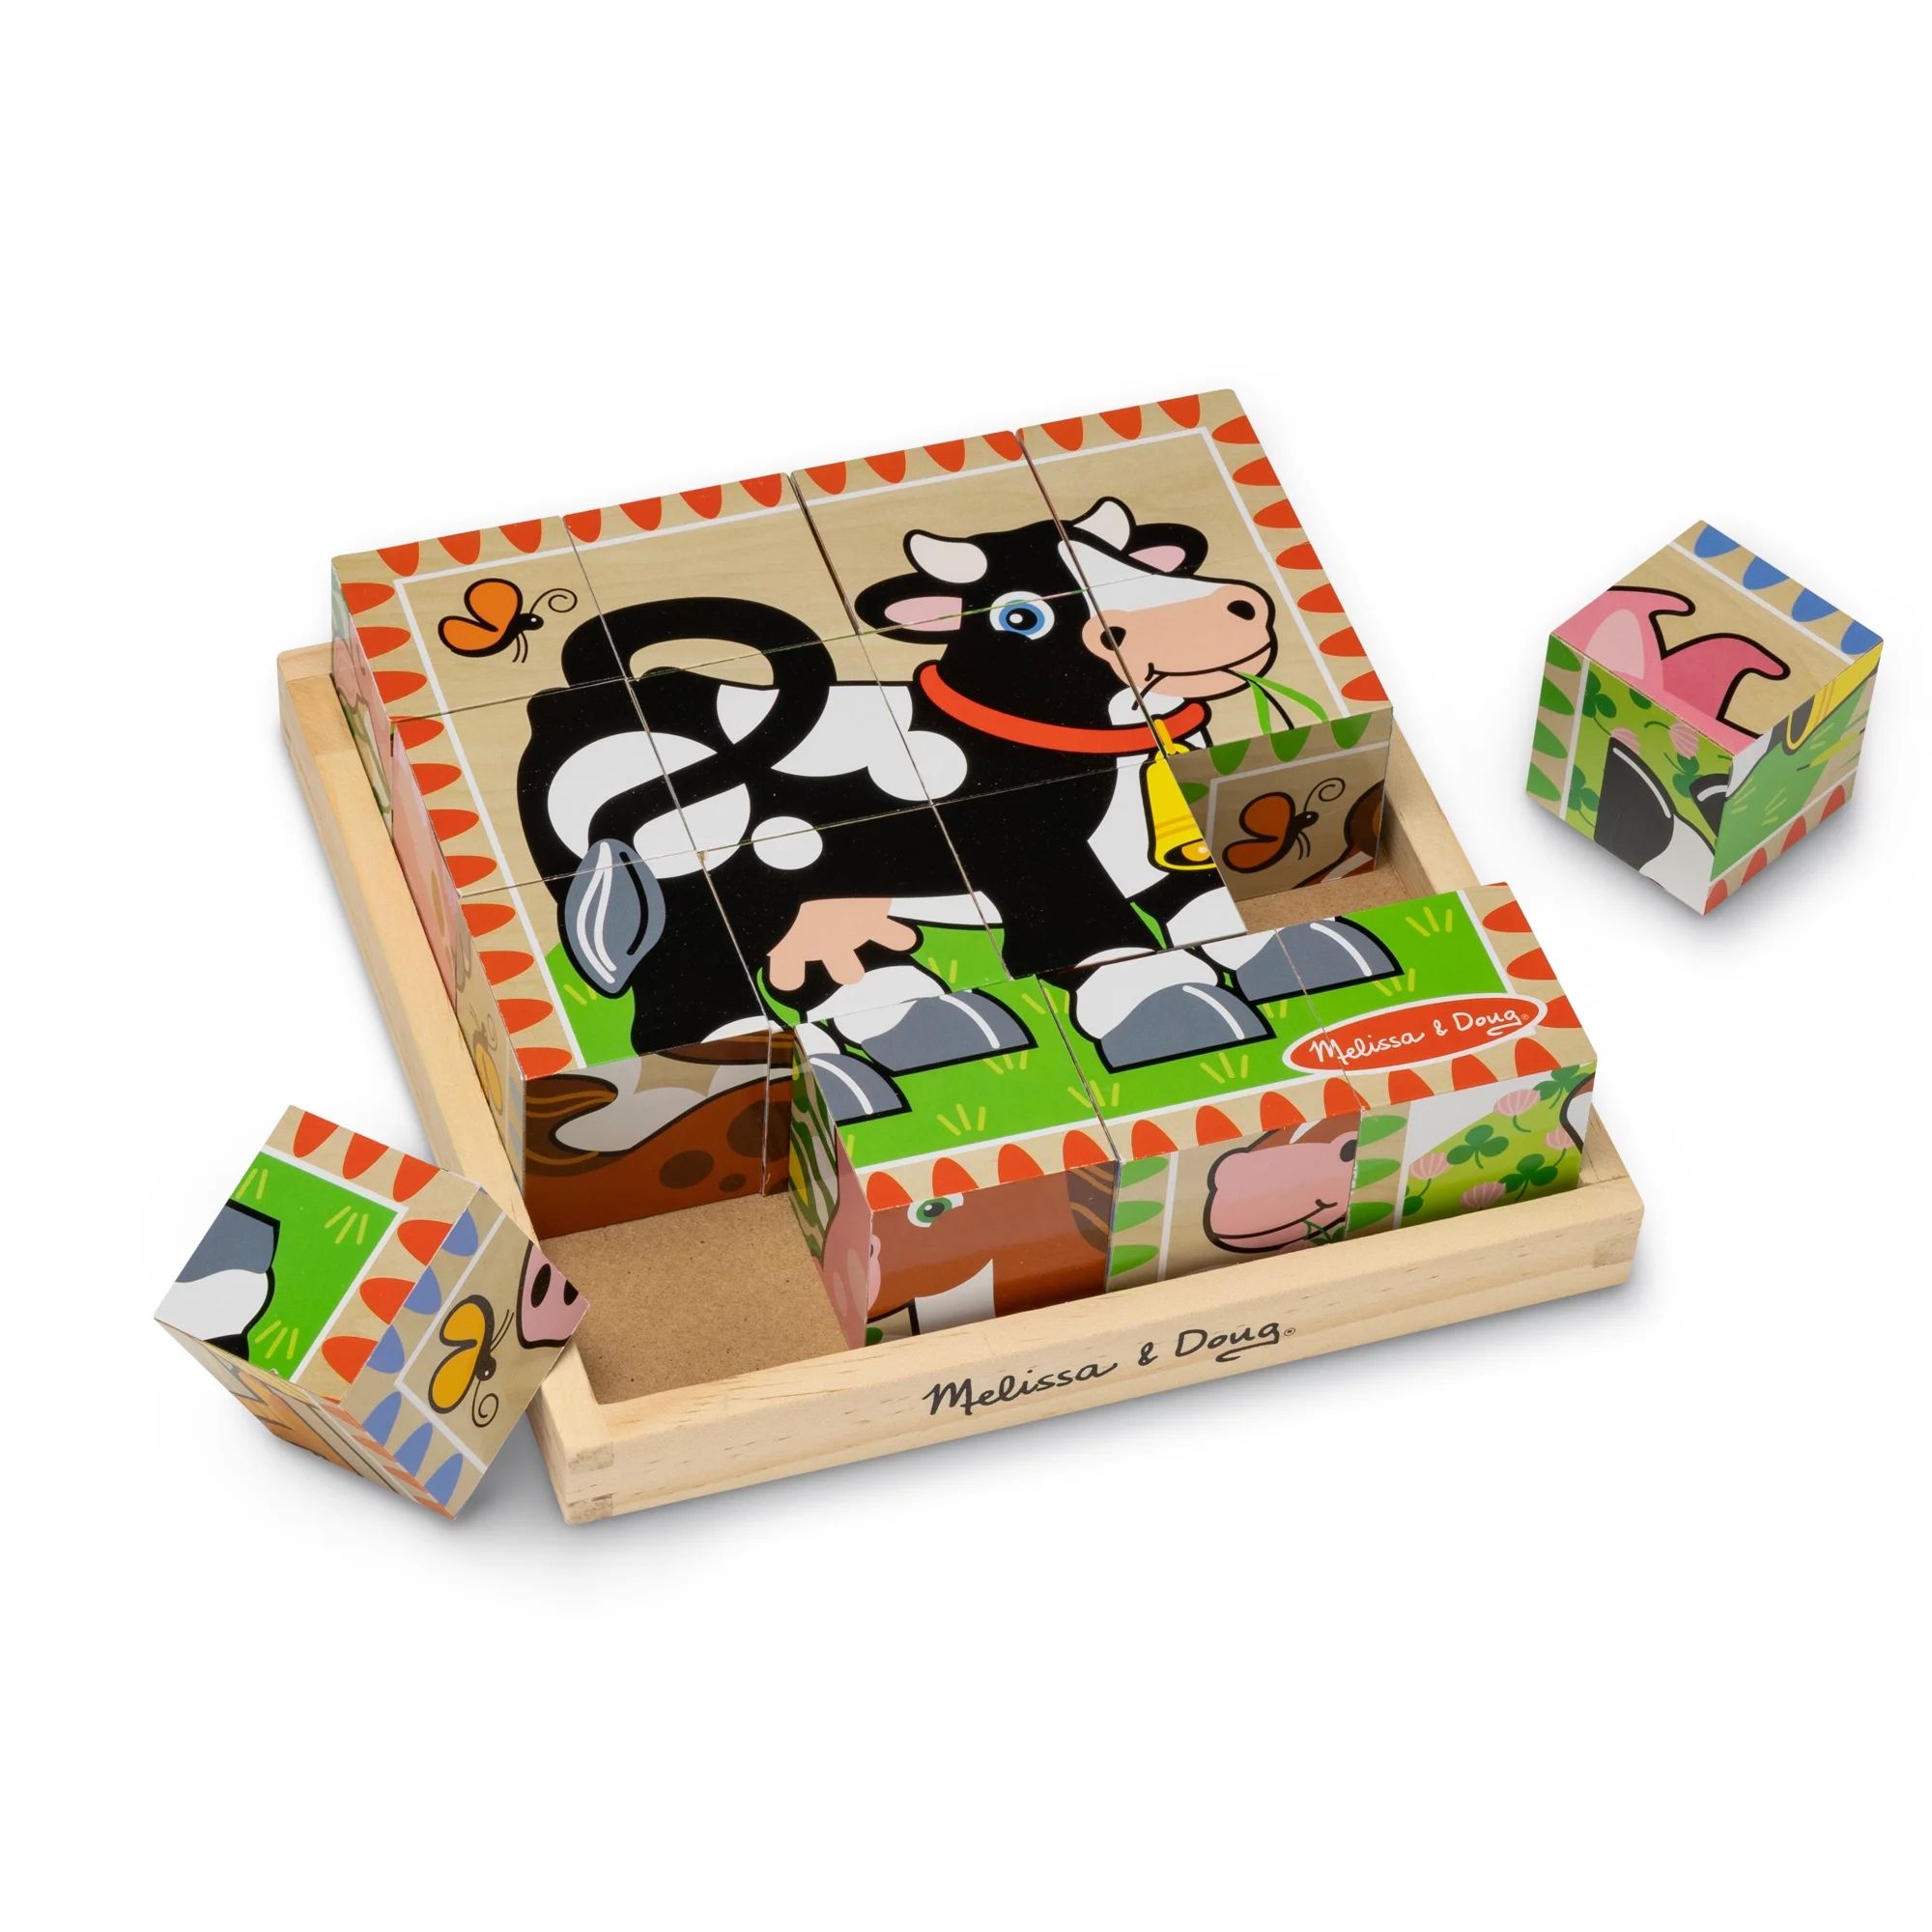 Melissa & Doug Farm Wooden Cube Puzzle With Storage Tray - 6 Puzzles in 1 | Walmart (US)